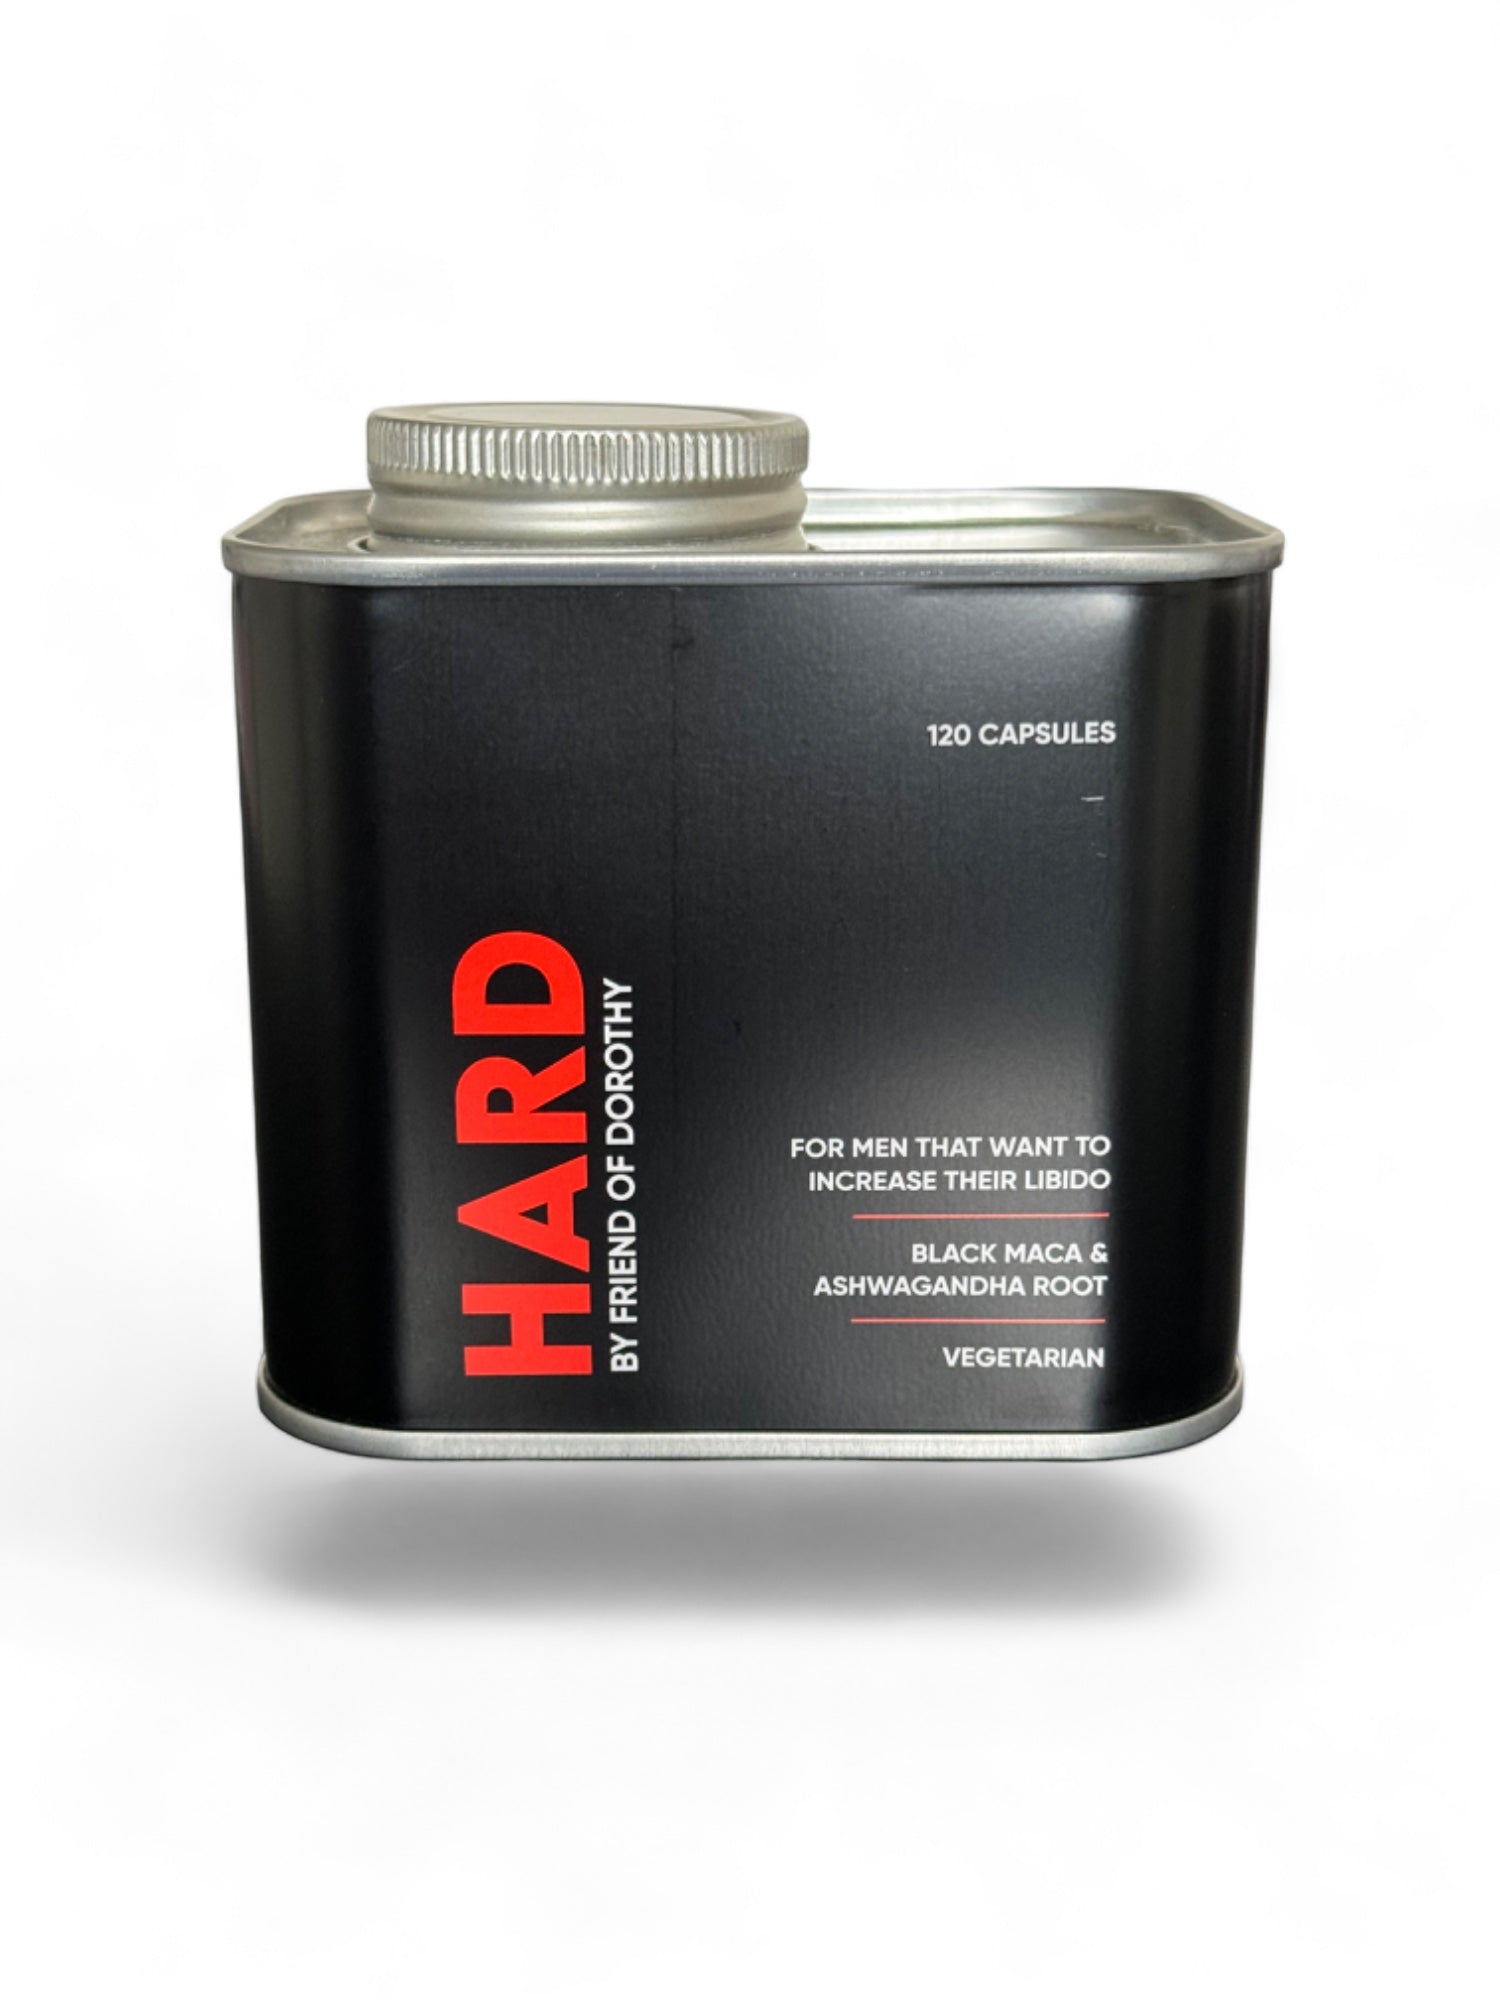 HARD - boost your libido, get hard & stay hard (Subscribe and save 15%) (2 months supply)